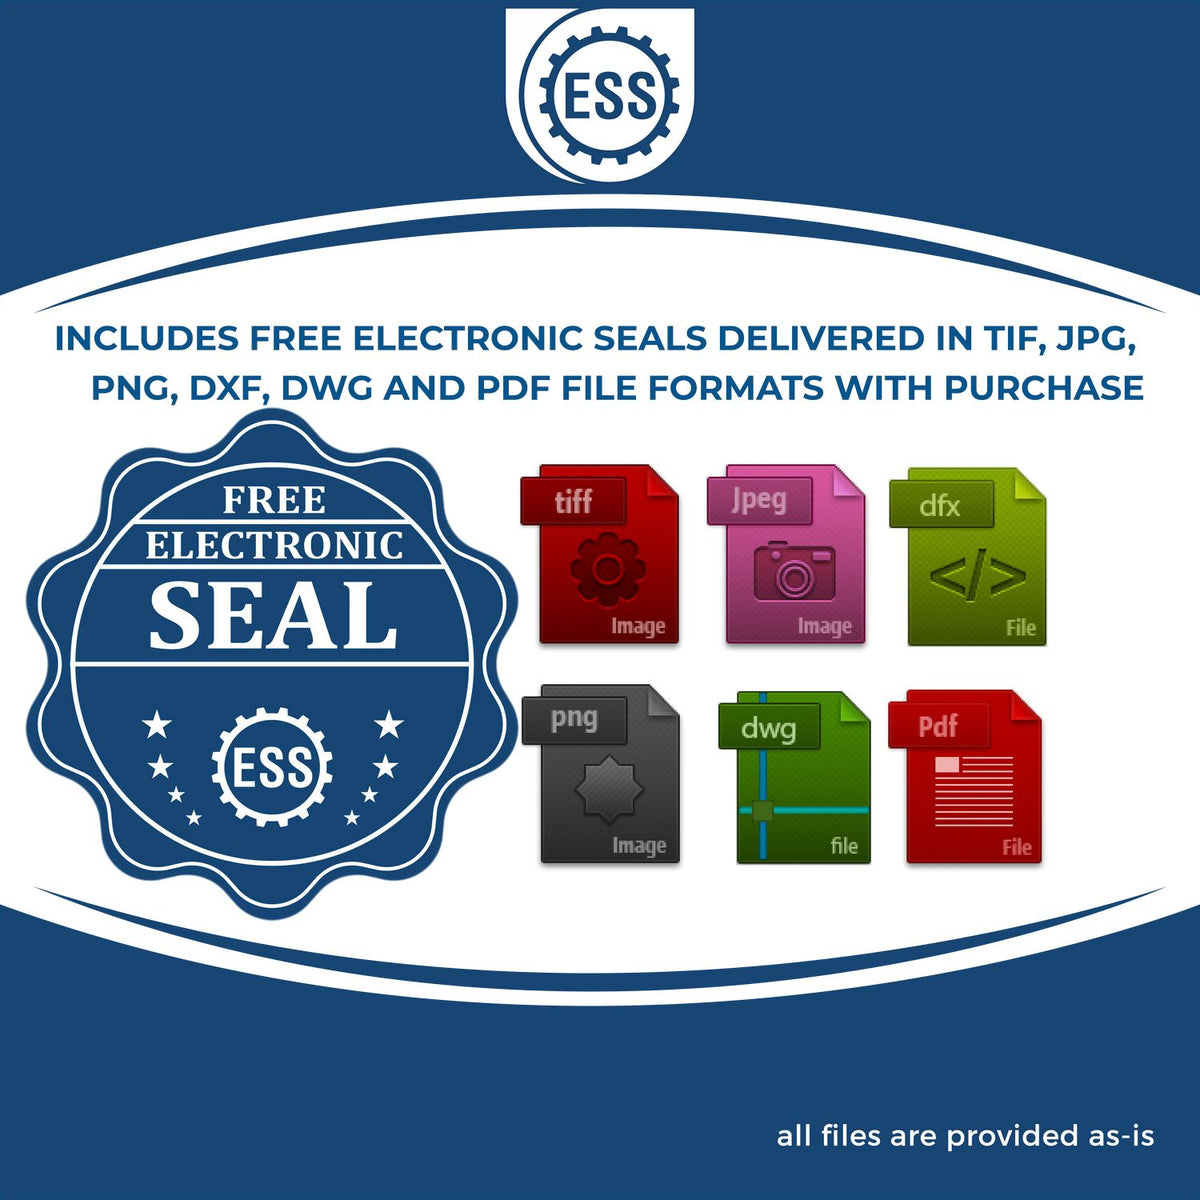 An infographic for the free electronic seal for the Heavy Duty Cast Iron Michigan Land Surveyor Seal Embosser illustrating the different file type icons such as DXF, DWG, TIF, JPG and PNG.